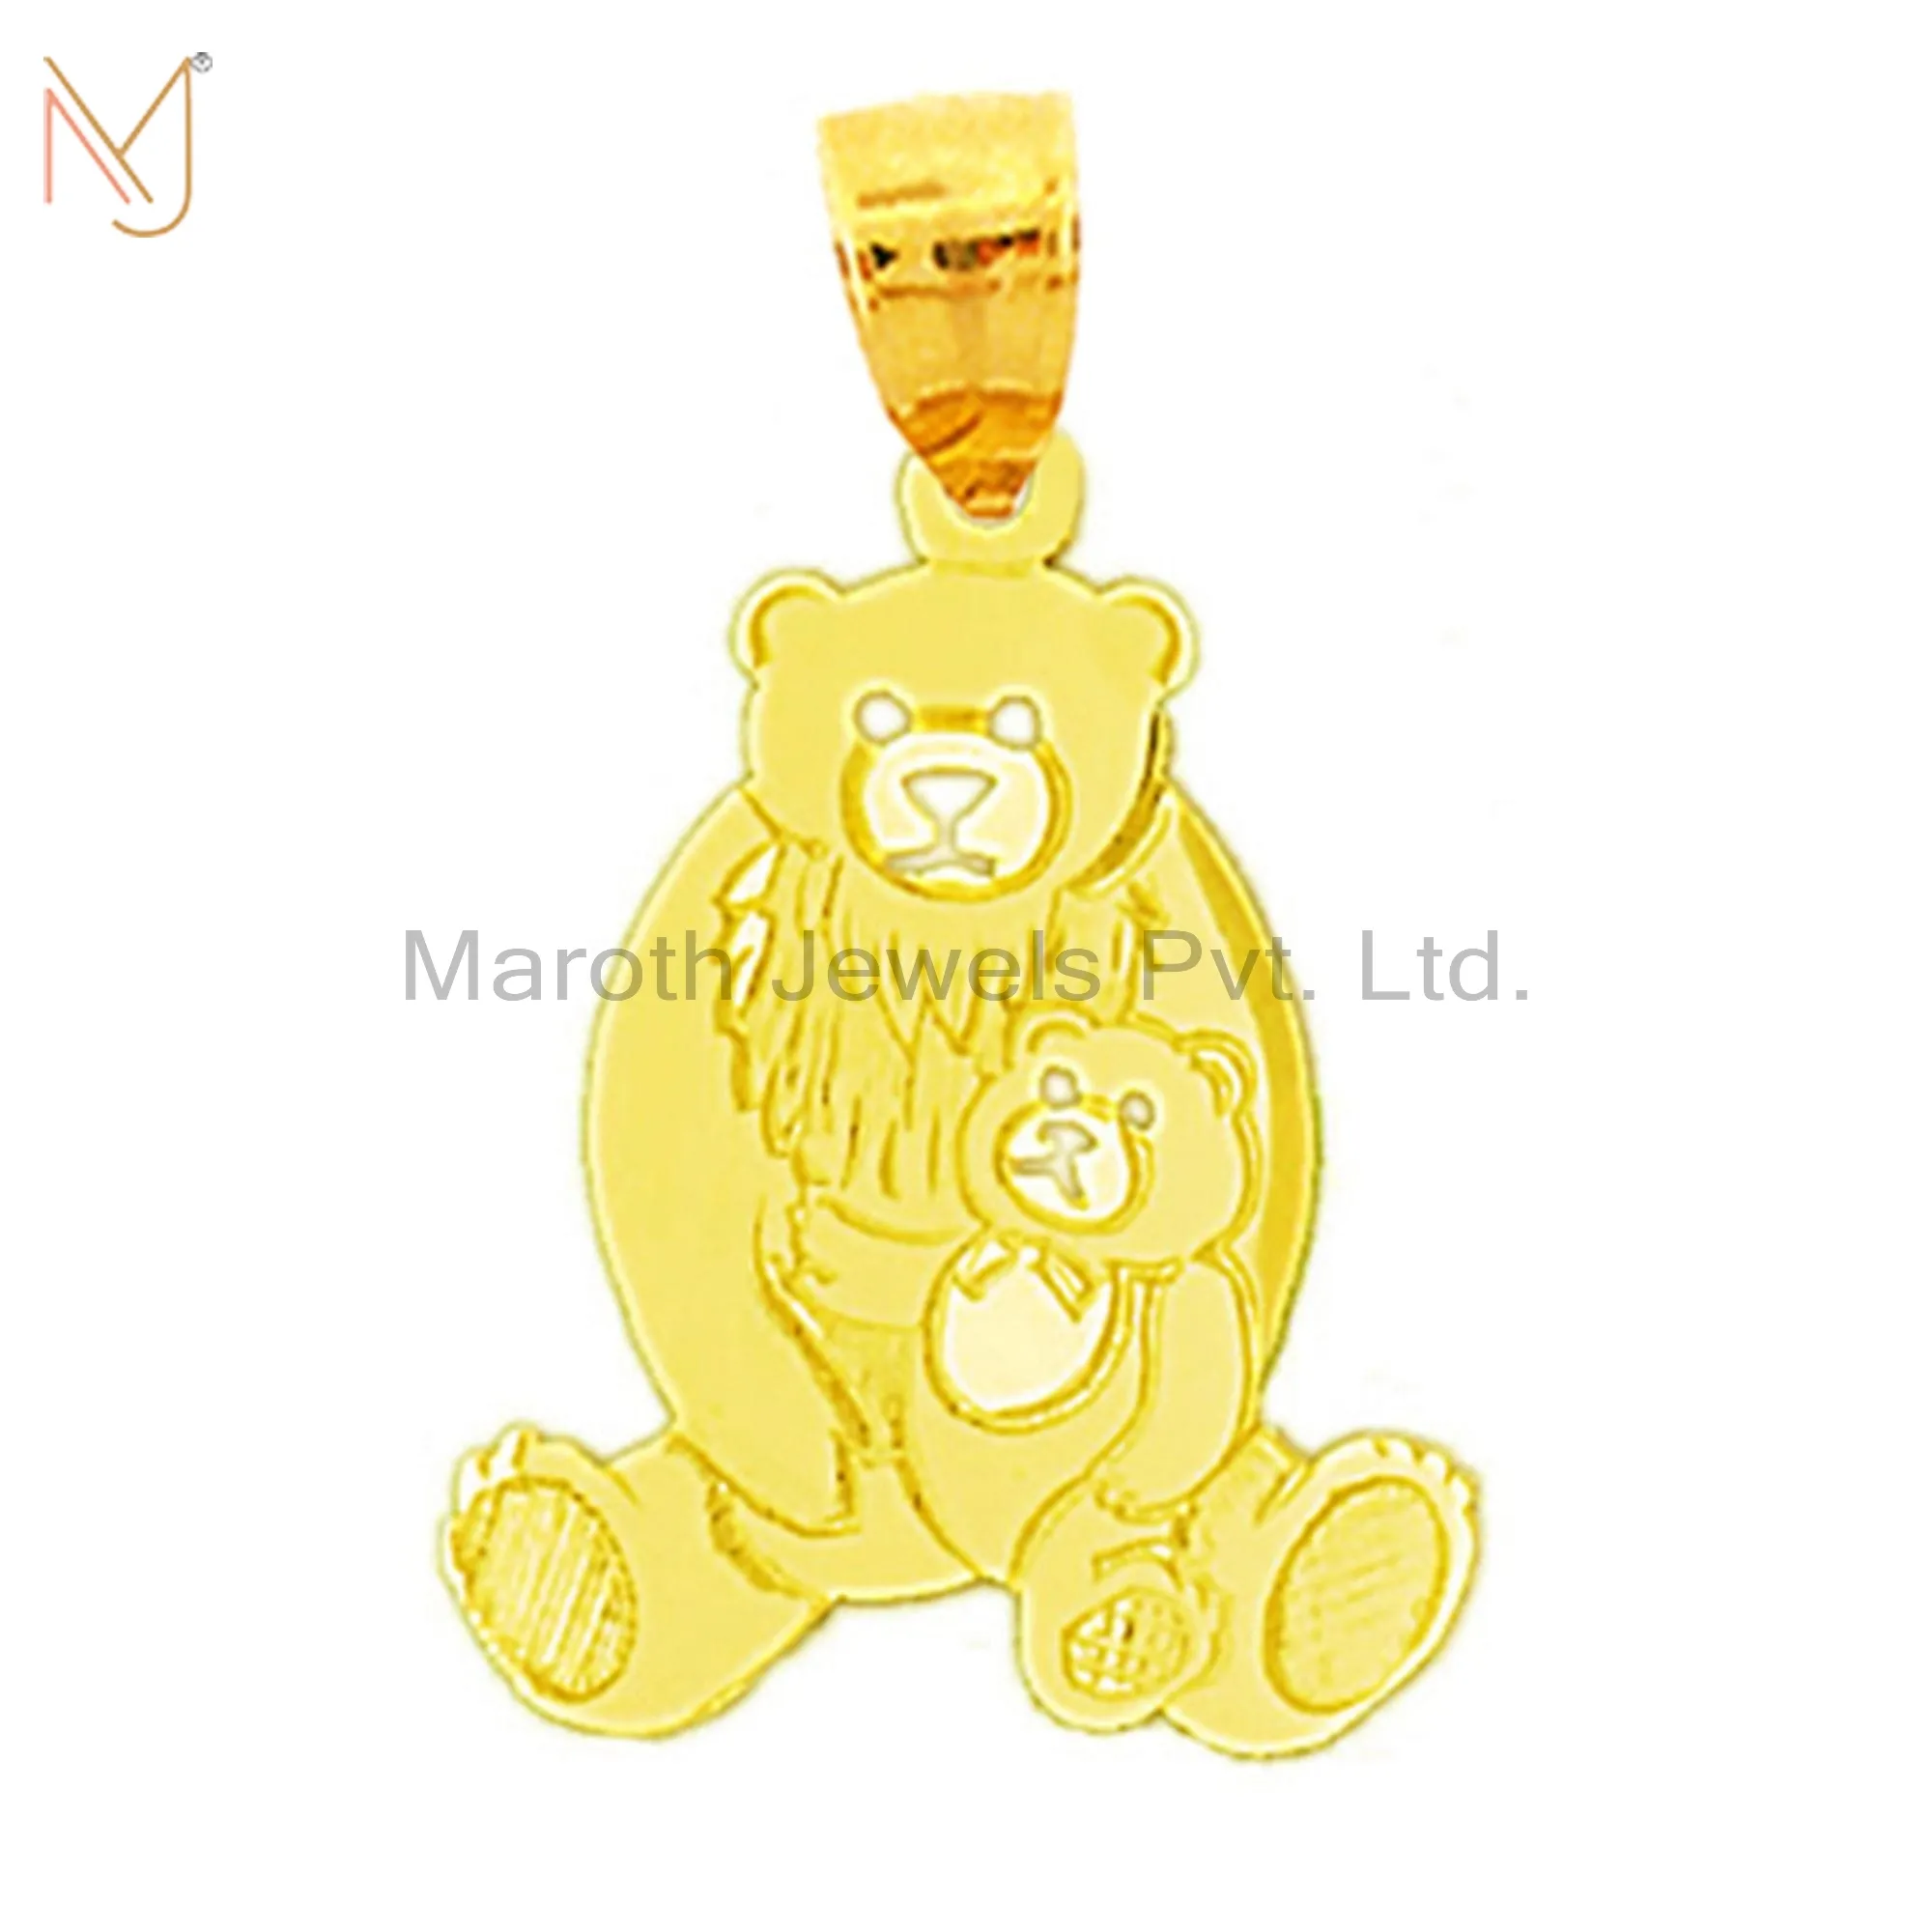 925 Sterling Silver Yellow Gold Plated Silhouette Bear With Cub Charm Pendant Jewelry Manufacturer